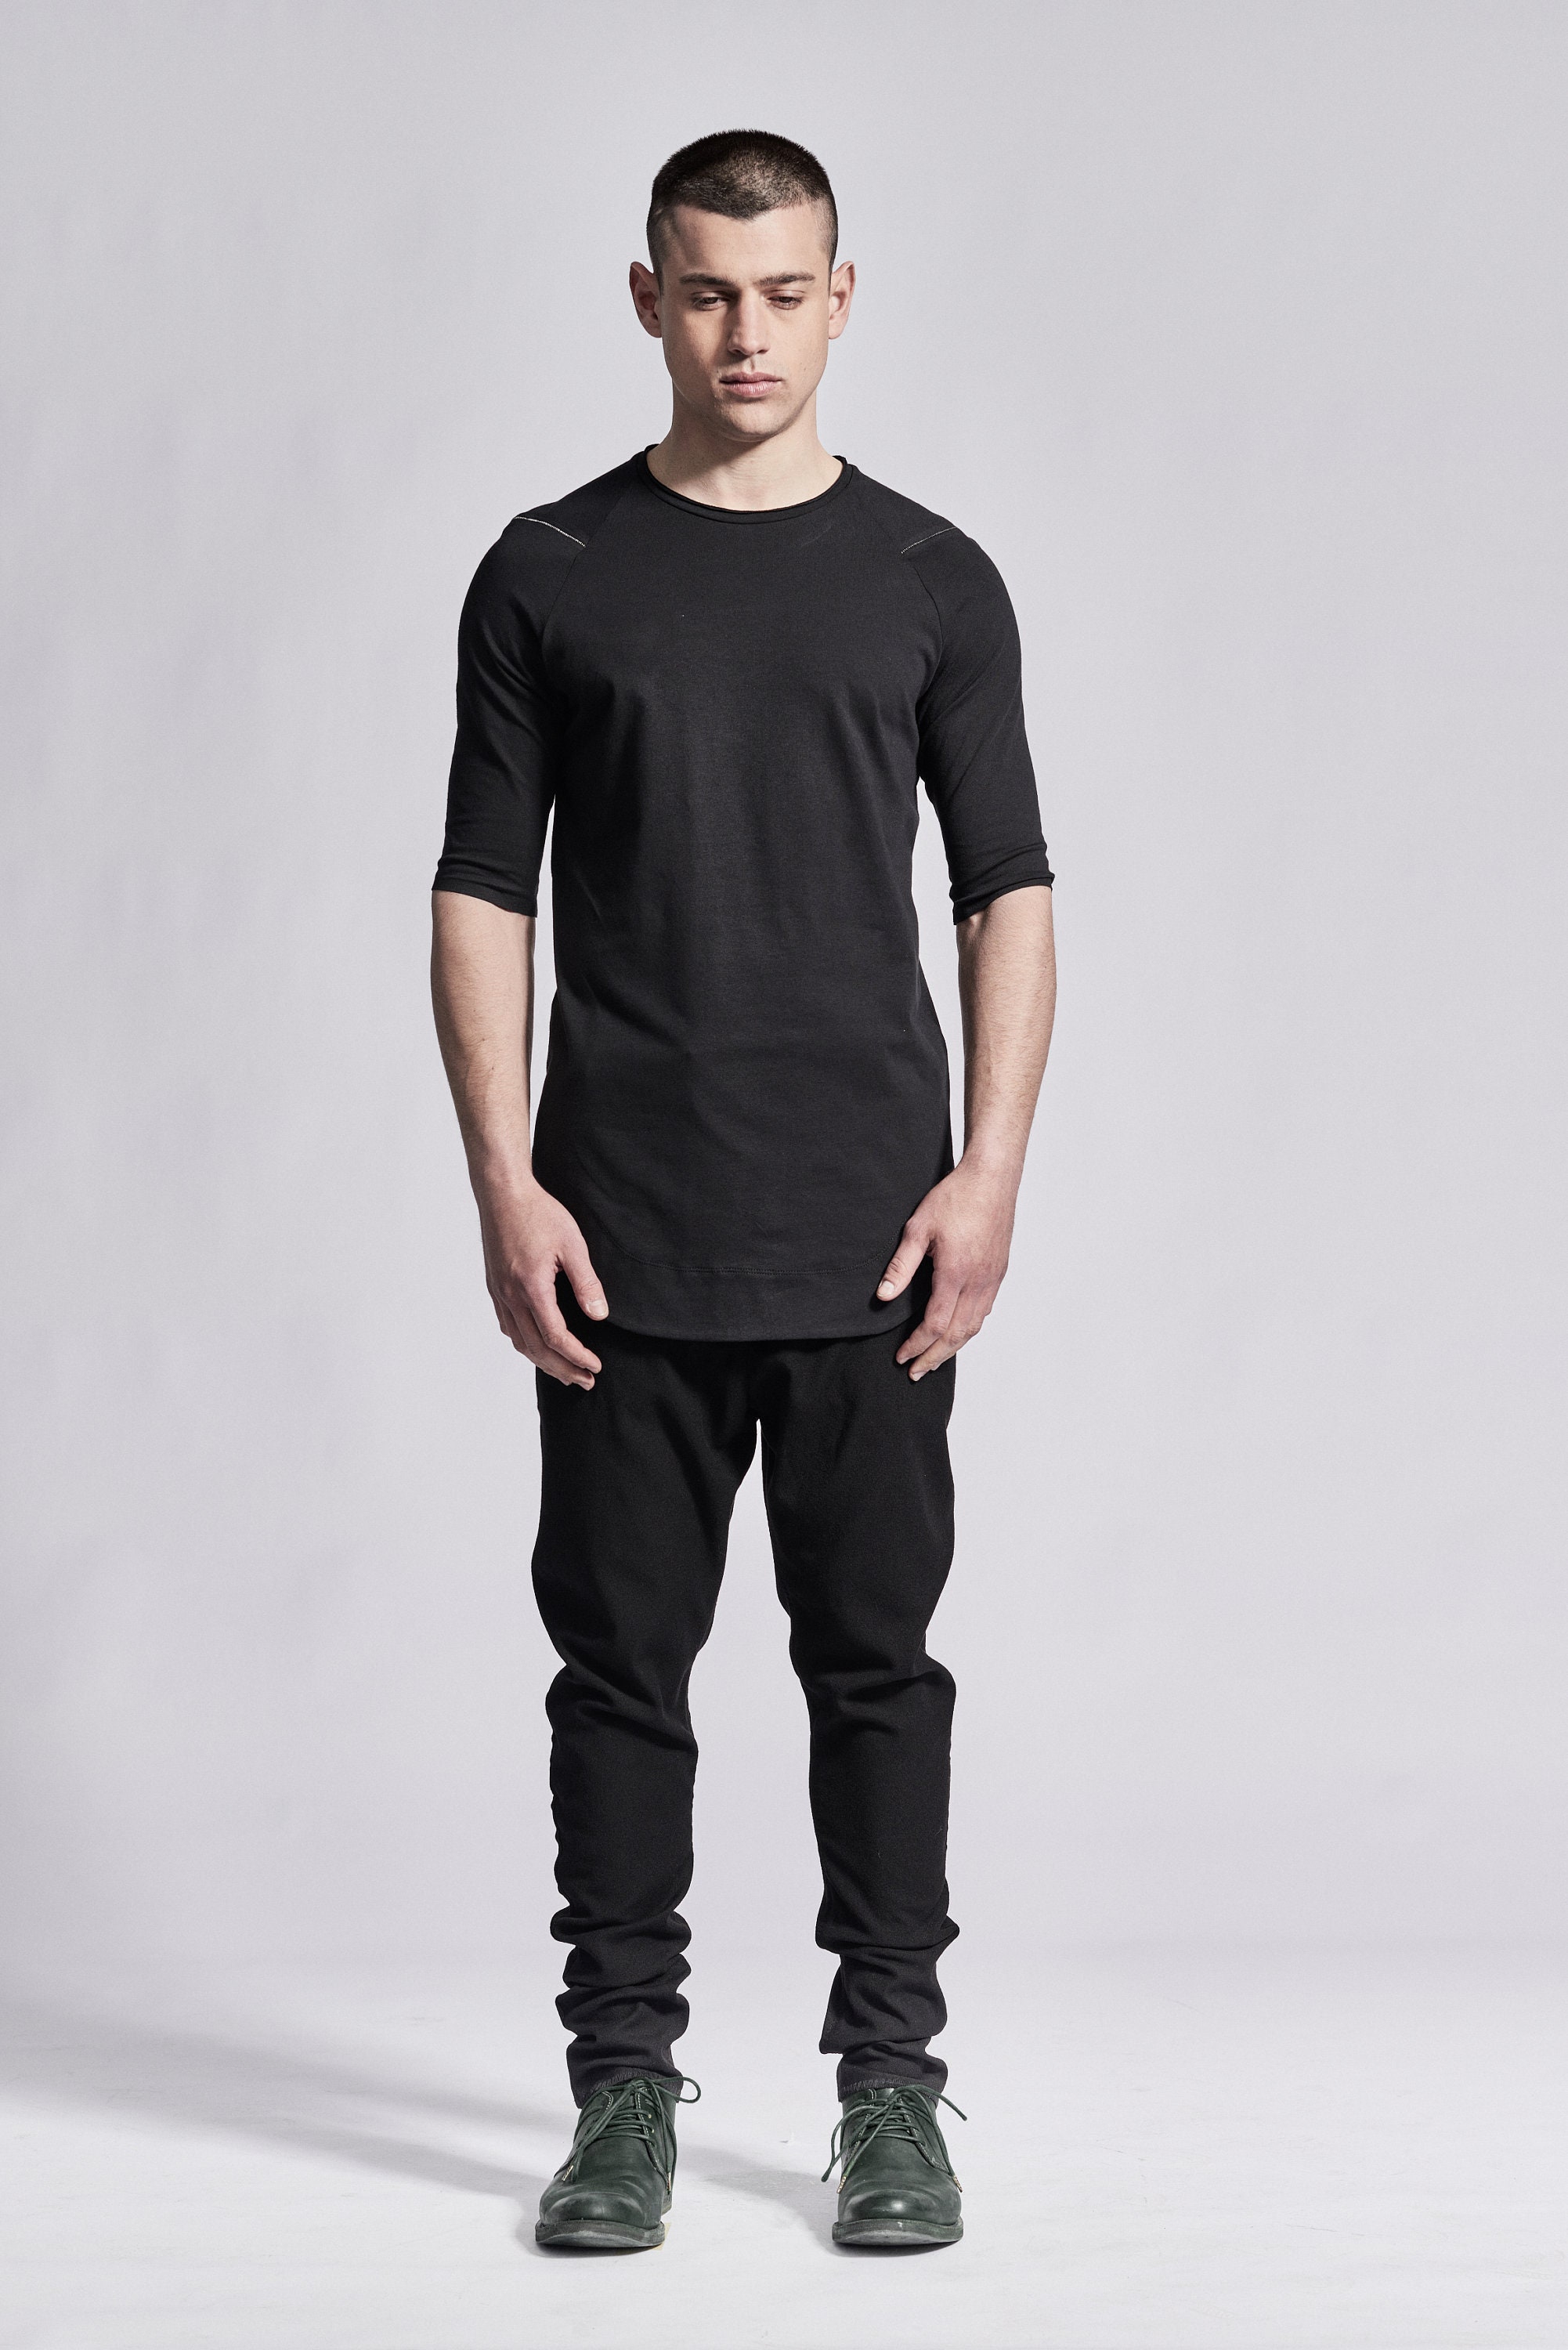 Half Sleeved Top With Scar Stitch / Kinetic Black Blouse/ Mens Urban ...